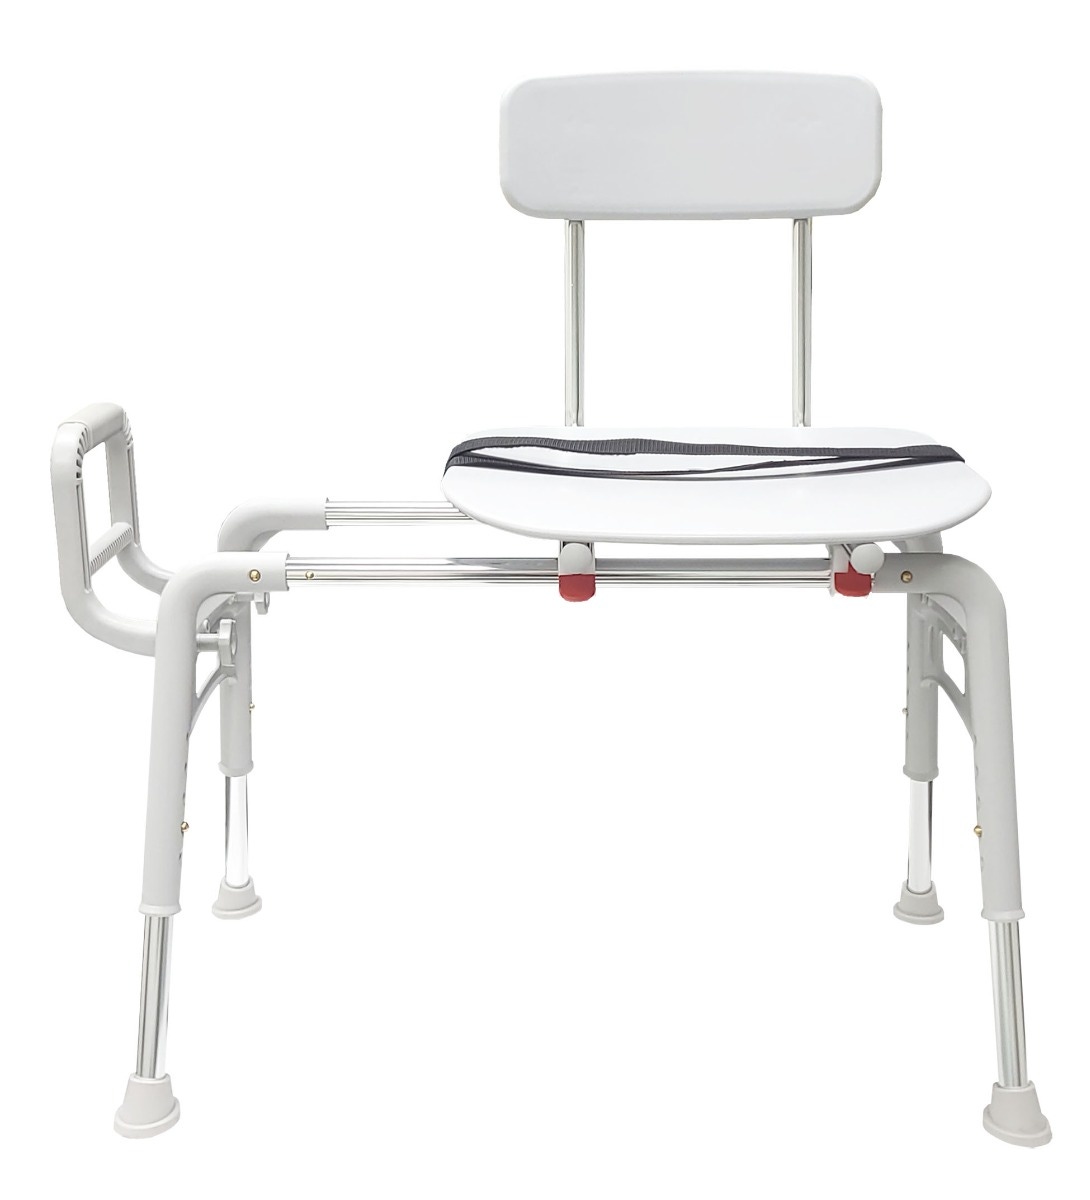 Sliding Transfer Bench Collection